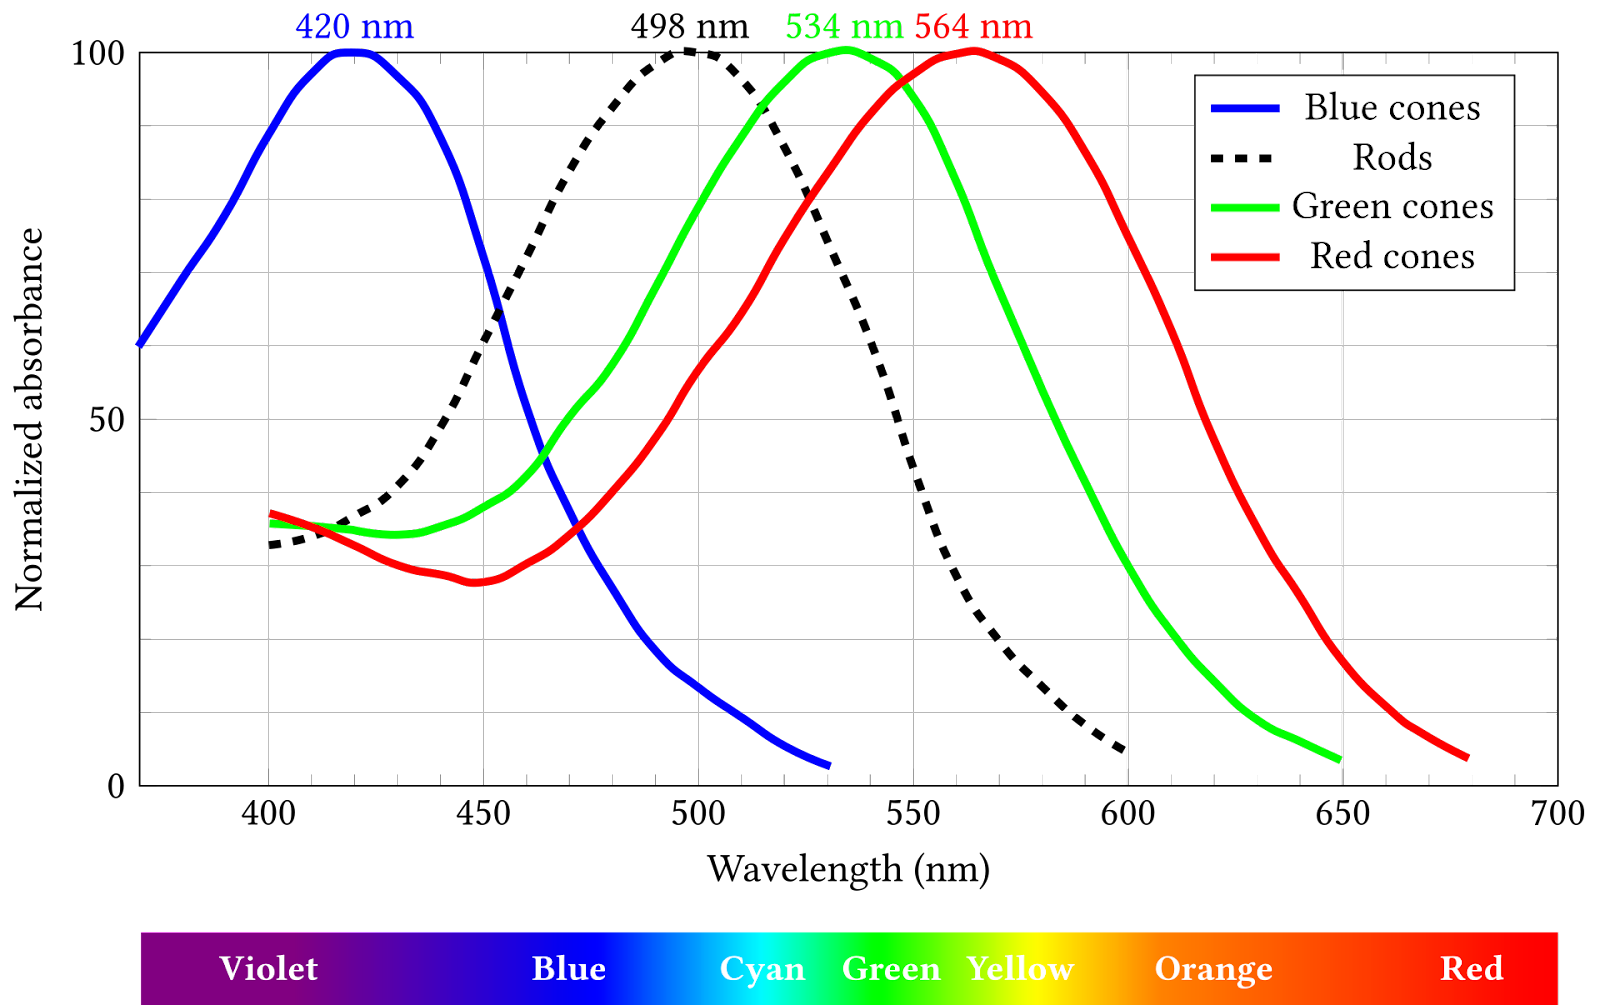 Normalized sensitivity spectra of photosensitive cells of the human retina.  Source.